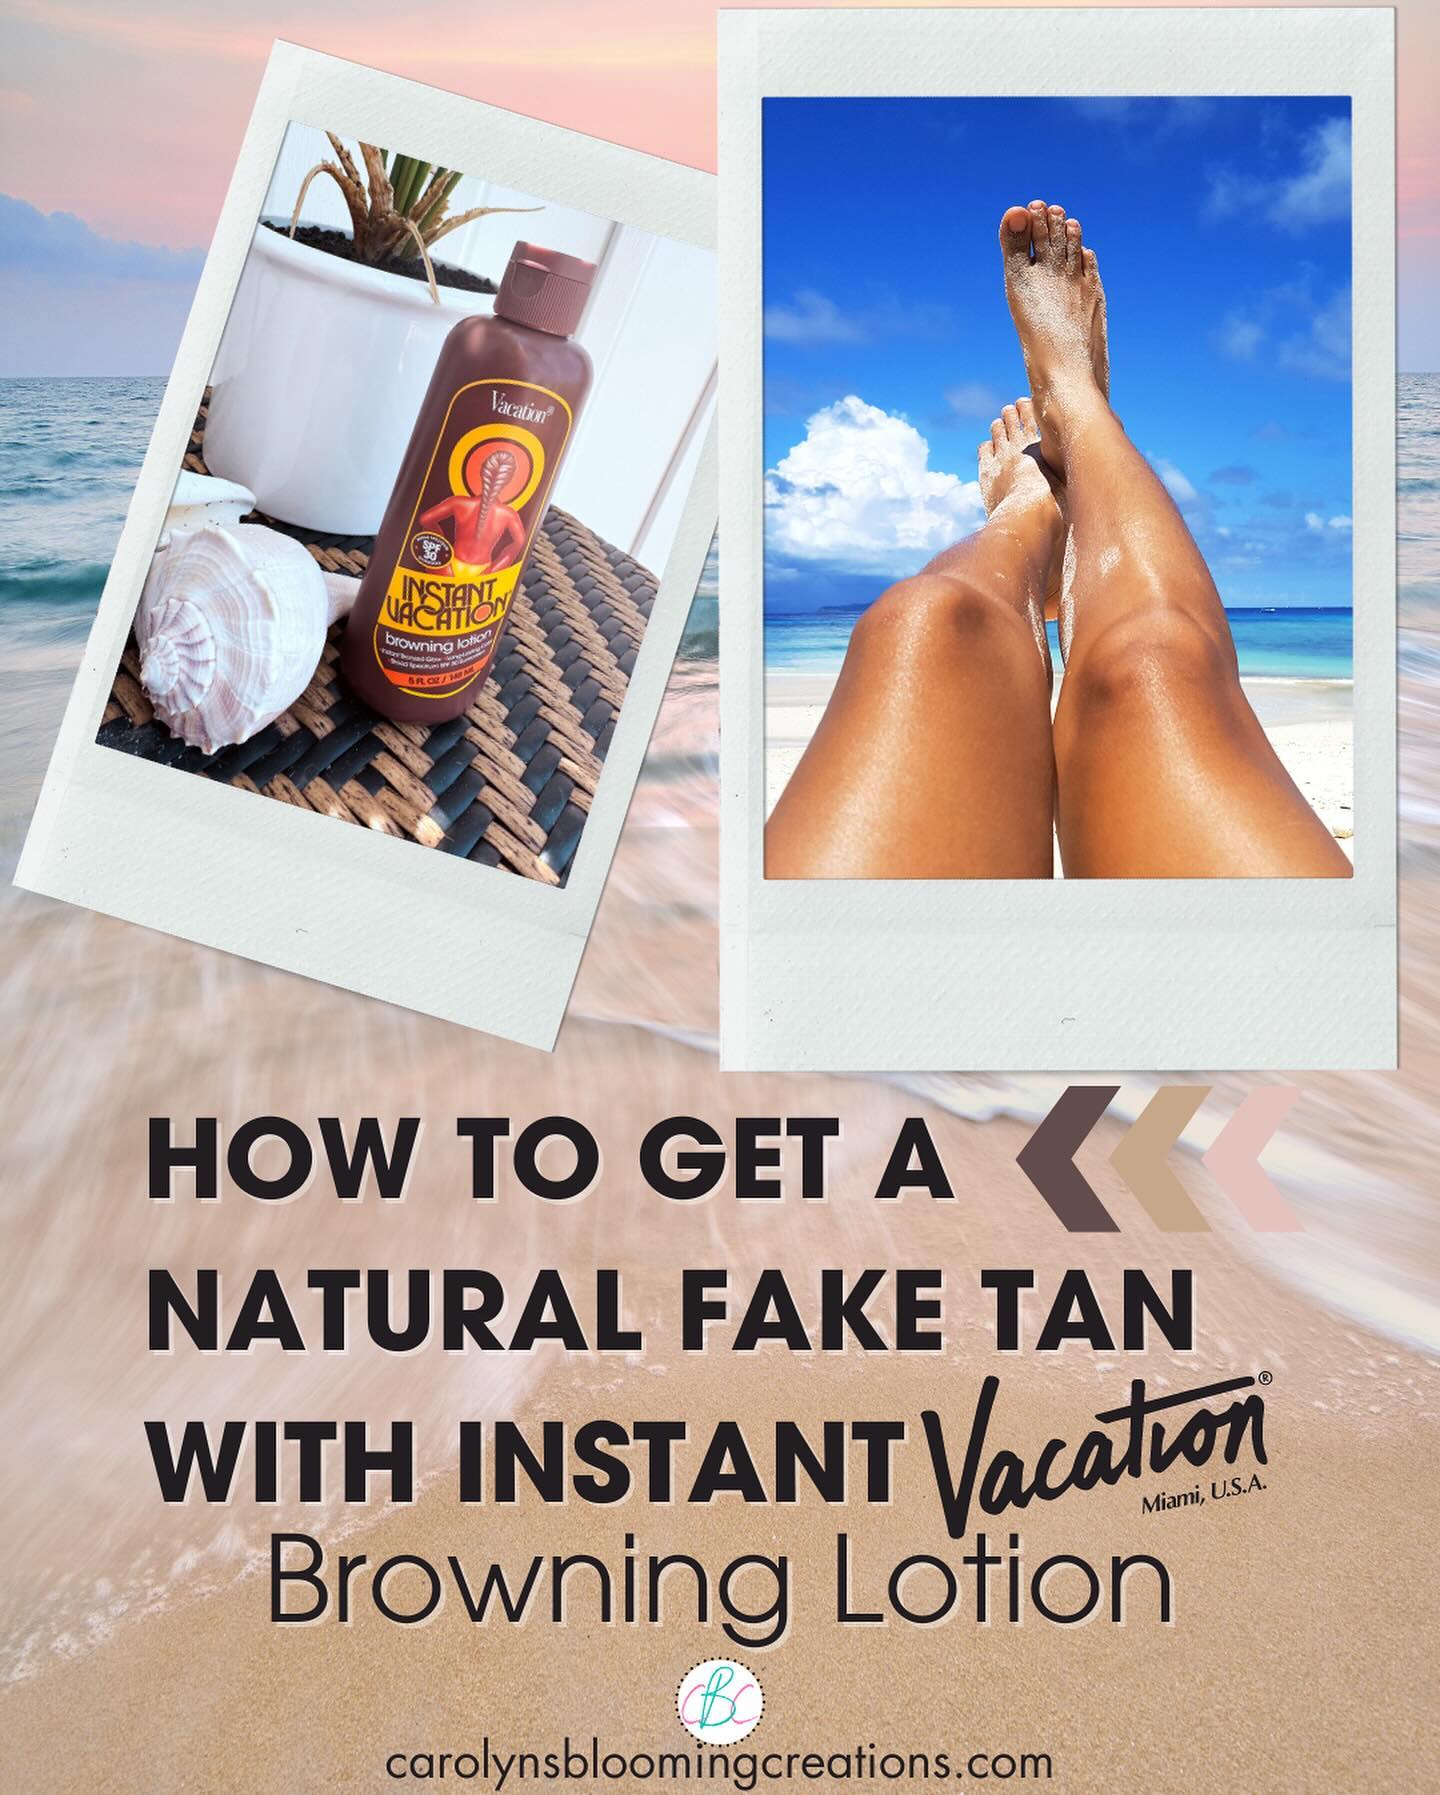 In style always: Tanning without sun! 

My latest test: @vacationinc Instant Vacation Browning Lotion. It tanned my fair